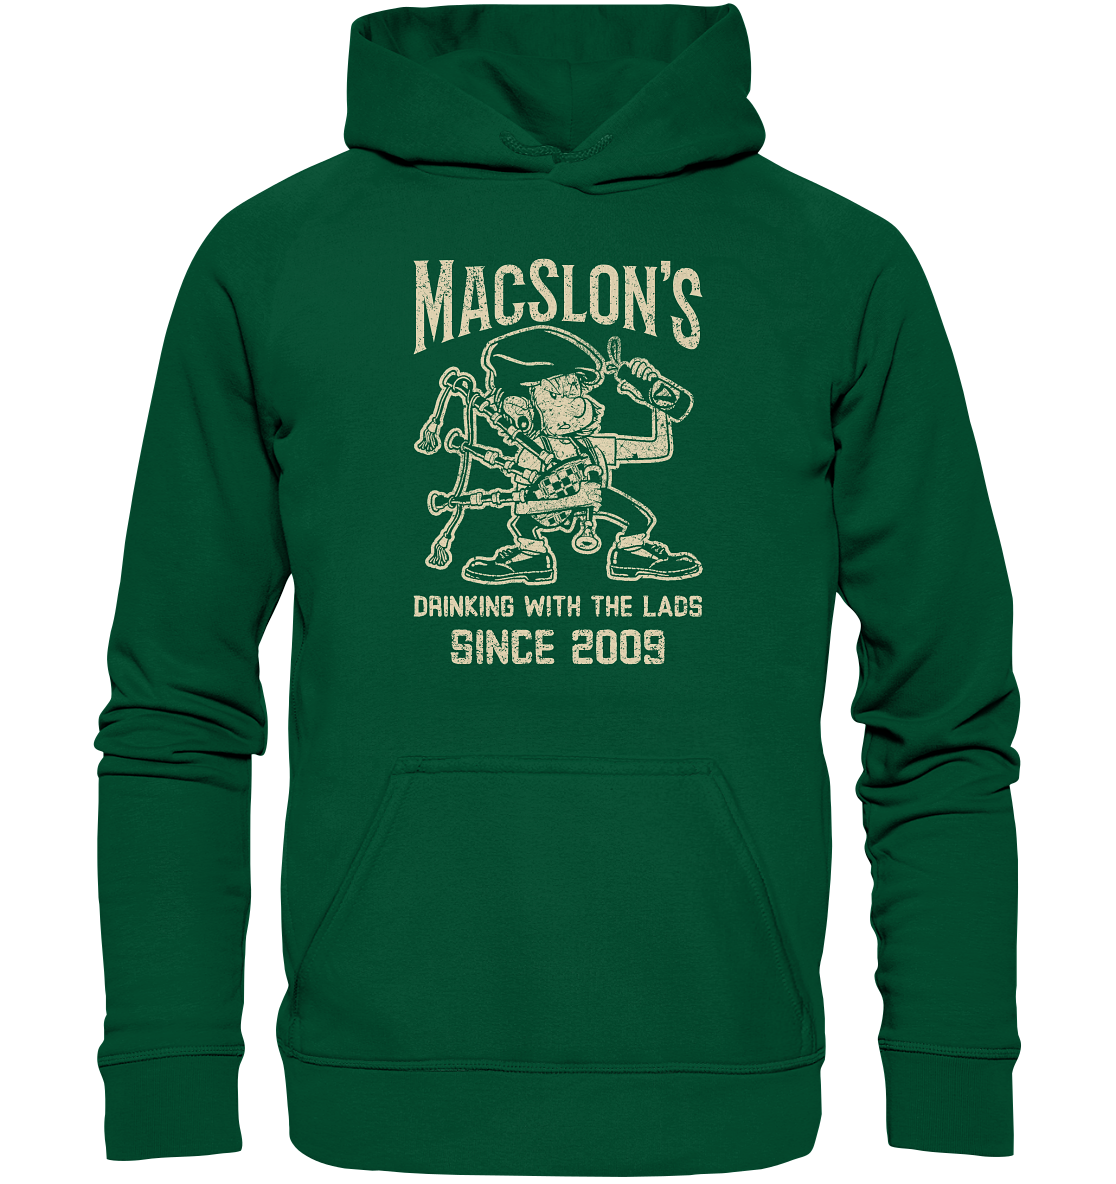 MacSlon's "Drinking With The Lads" - Basic Unisex Hoodie